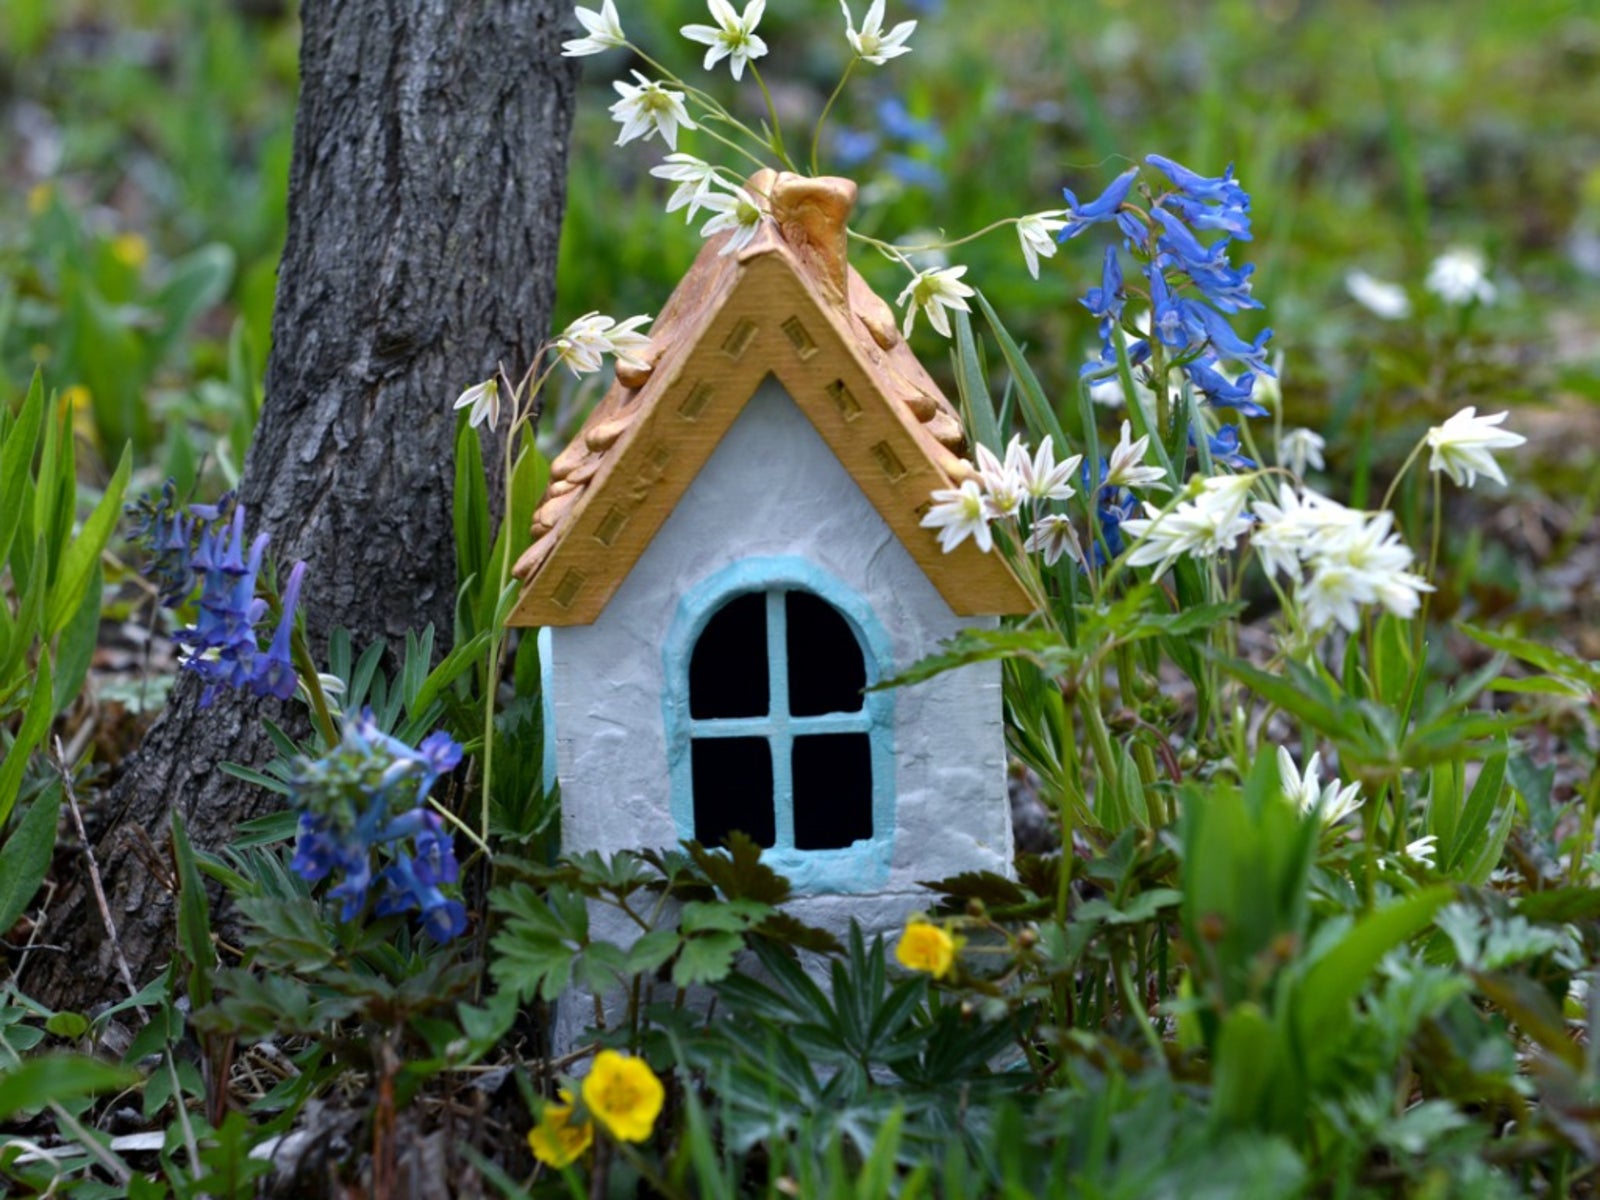 Plant Ideas For A Fairy Garden - Plants That Attract Fairies To The Garden